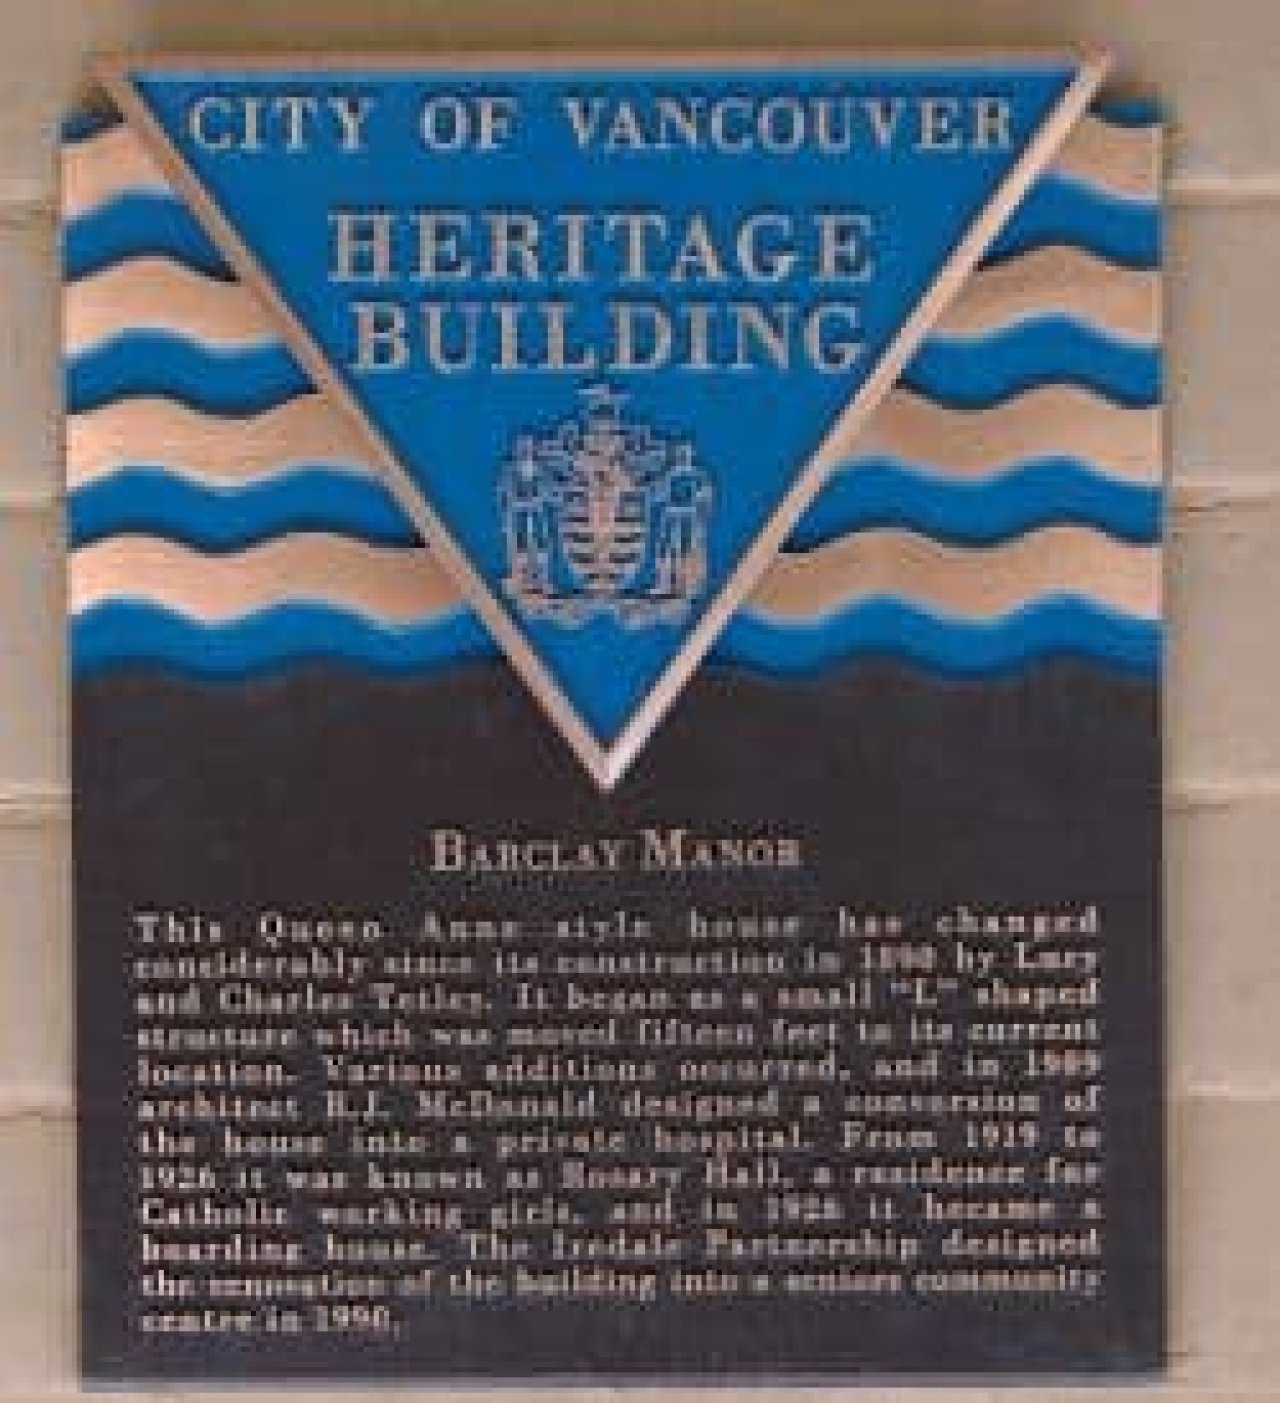 Barclay Manor Heritage Plaque
Source: http://wesn.ca/barclay-manor/